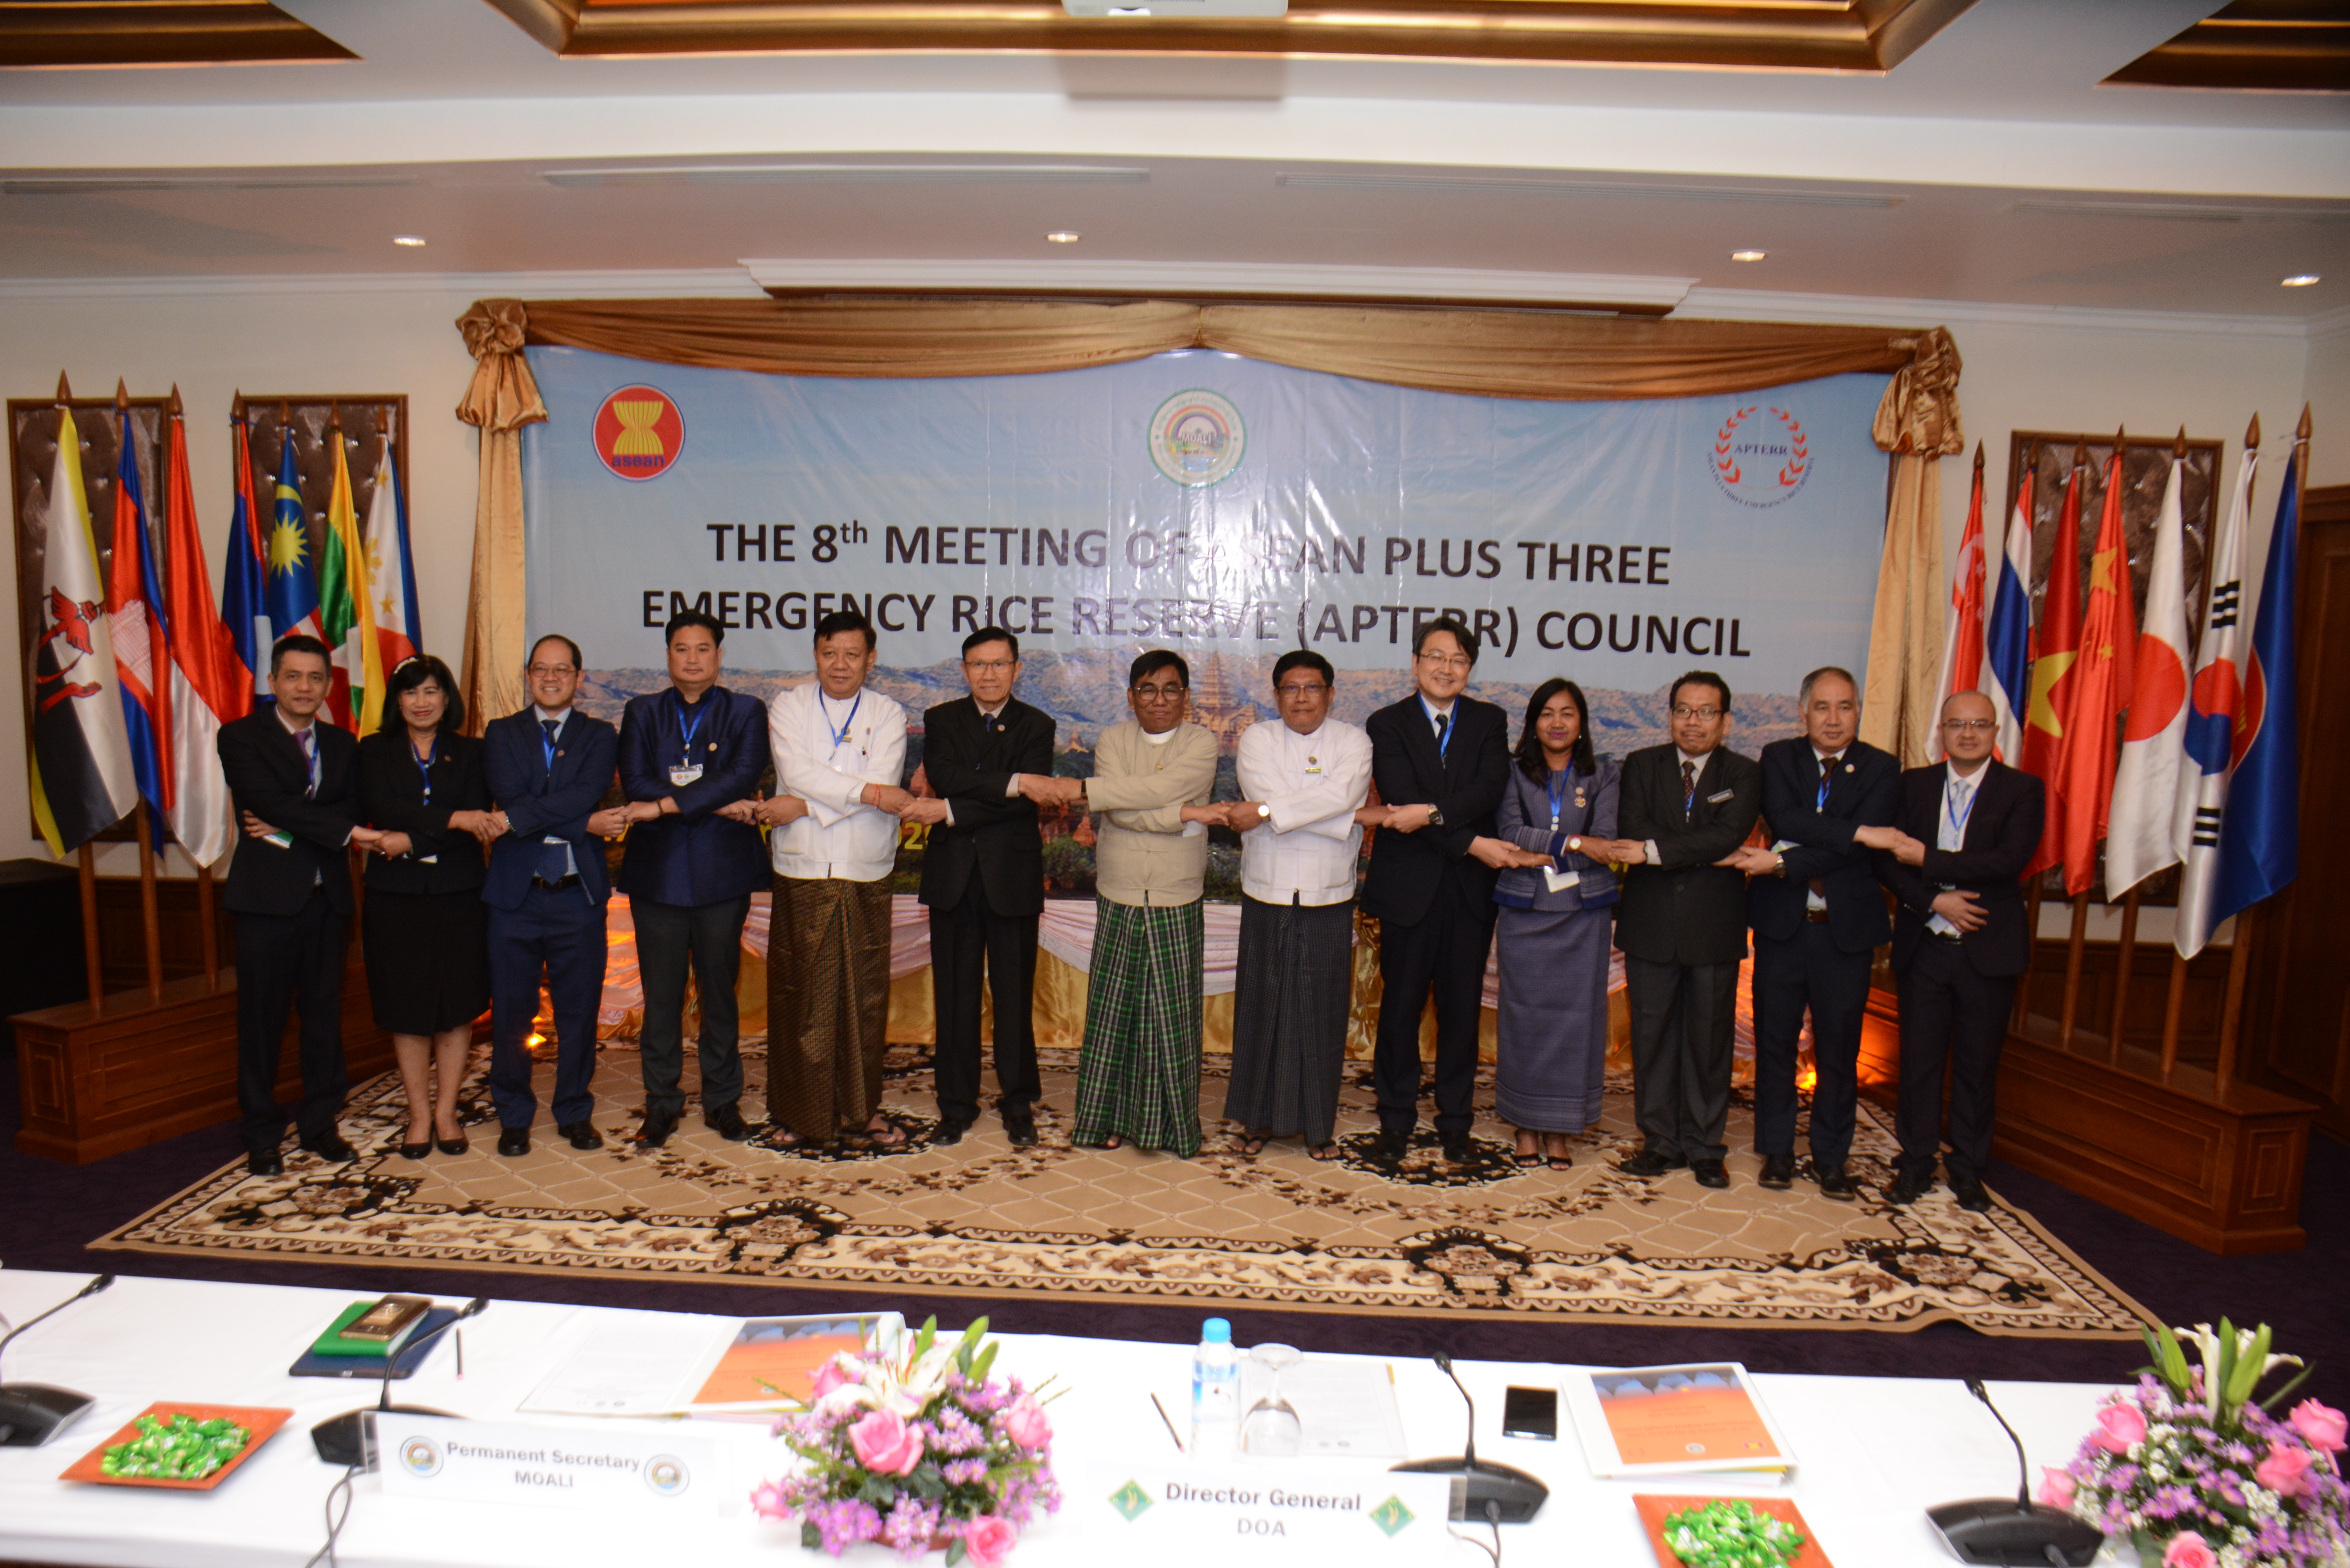 The 8<sup>th</sup> Meeting of ASEAN Plus Three Emergency Rice Reserve (APTERR) Council